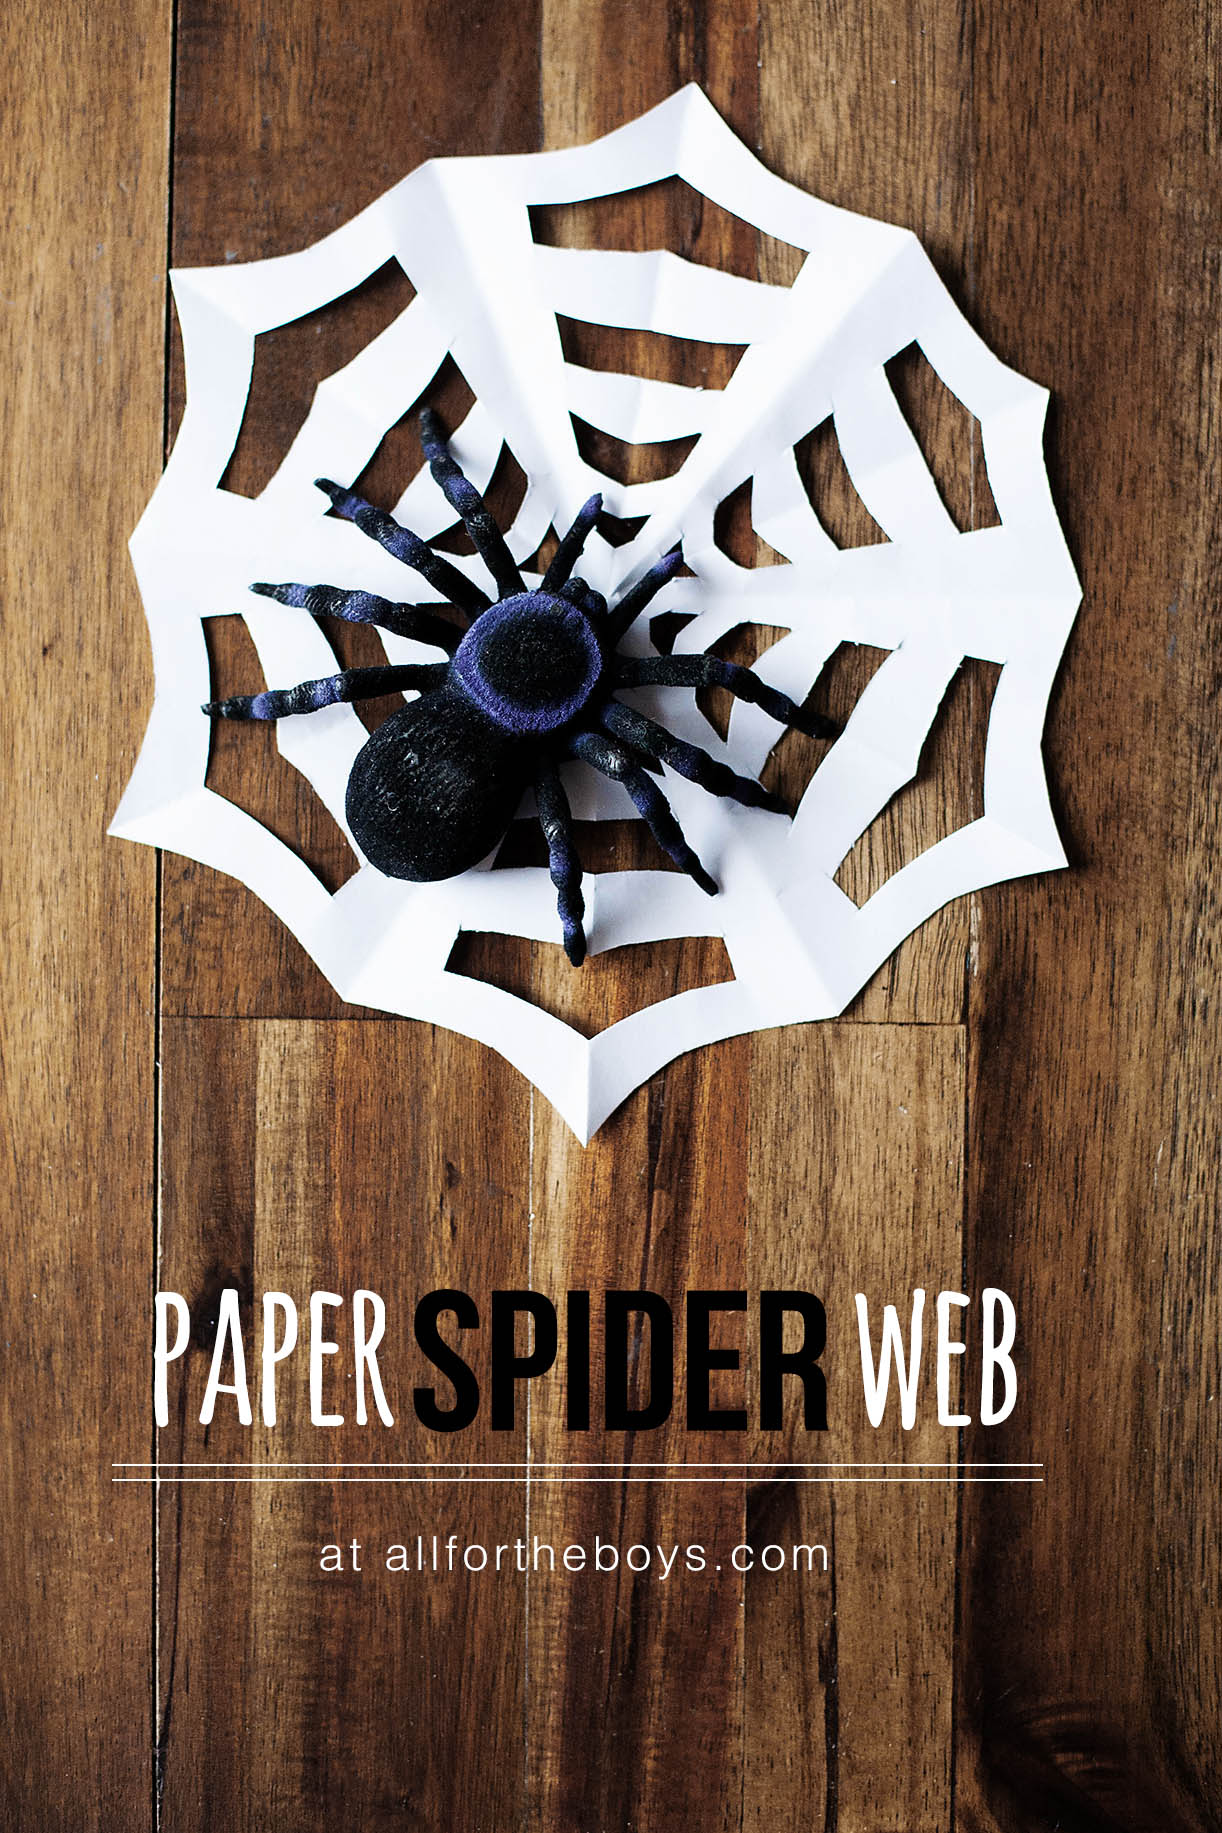 Paper spiderweb - like snowflakes, but for Halloween!